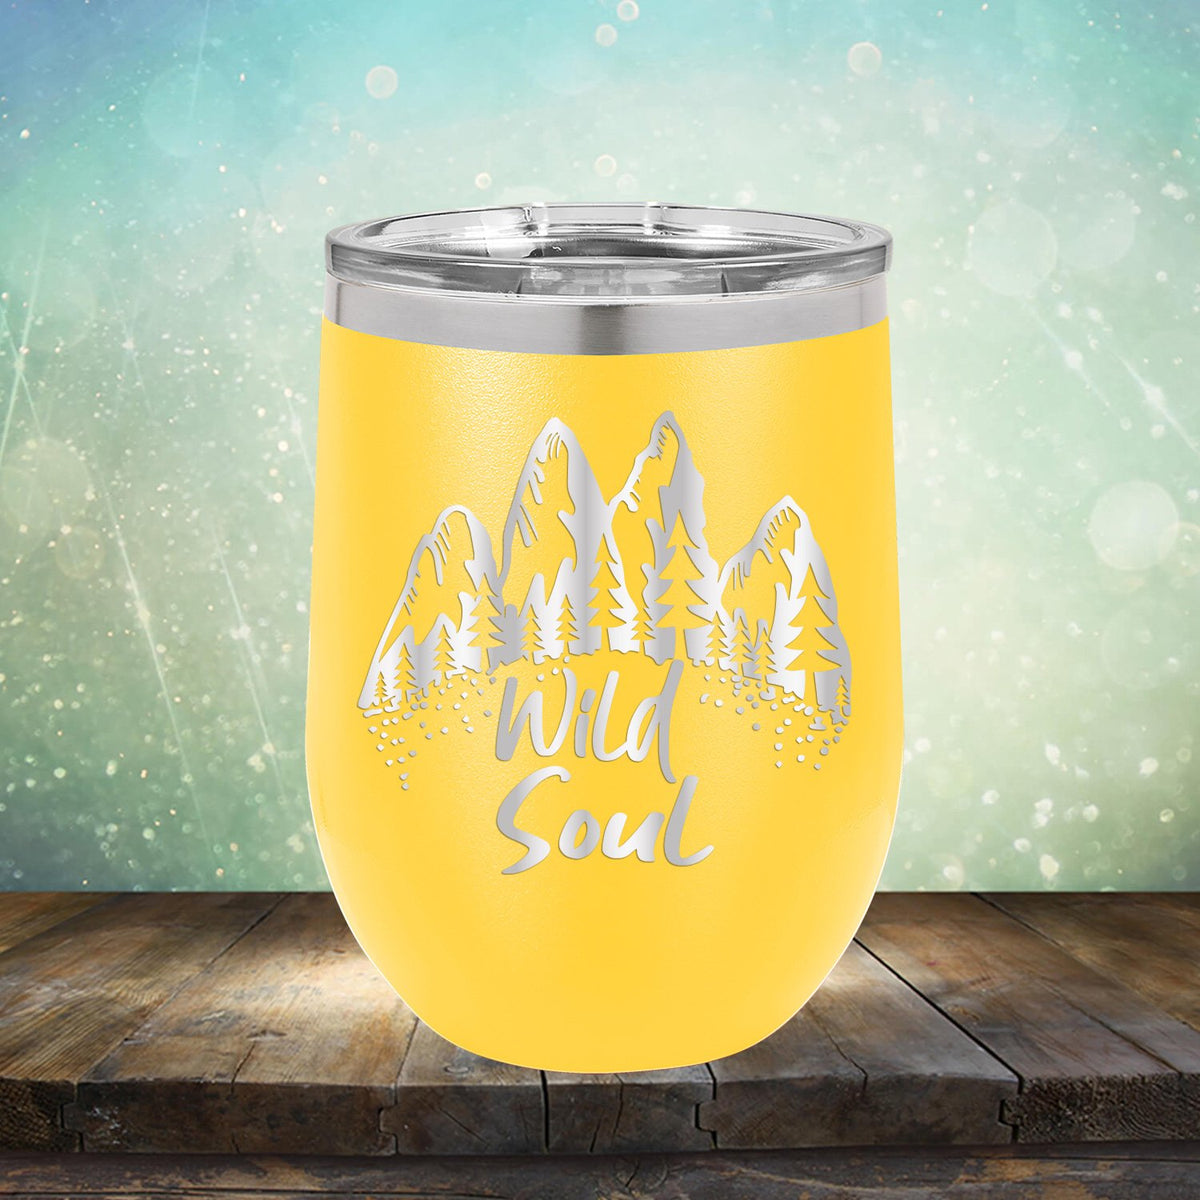 Mountain Wild Soul - Stemless Wine Cup